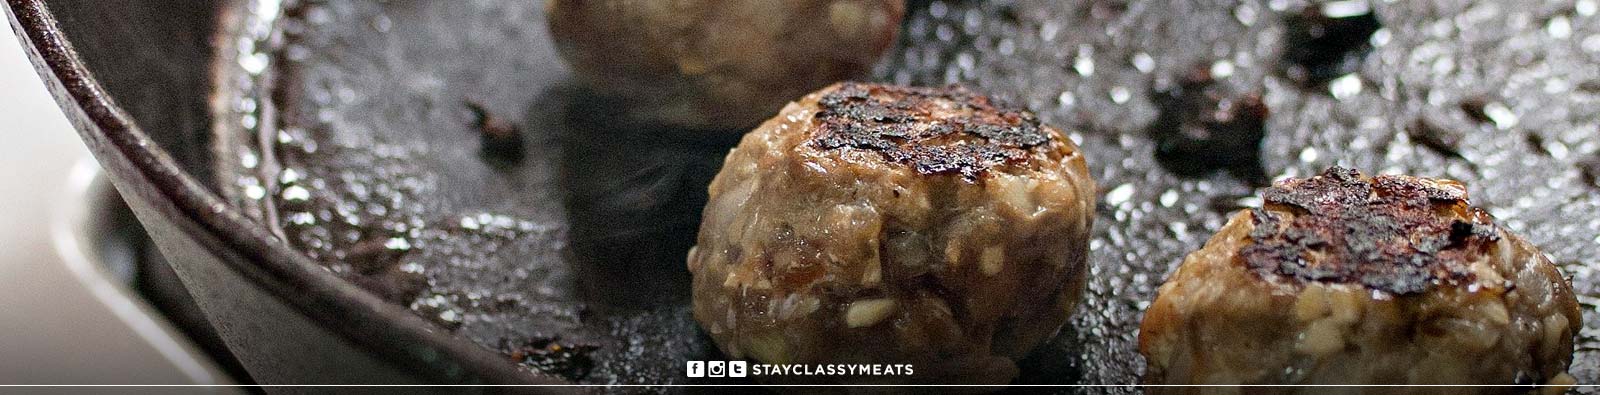 Video - Pan-Seared Meatballs with Soy-Ginger Sauce